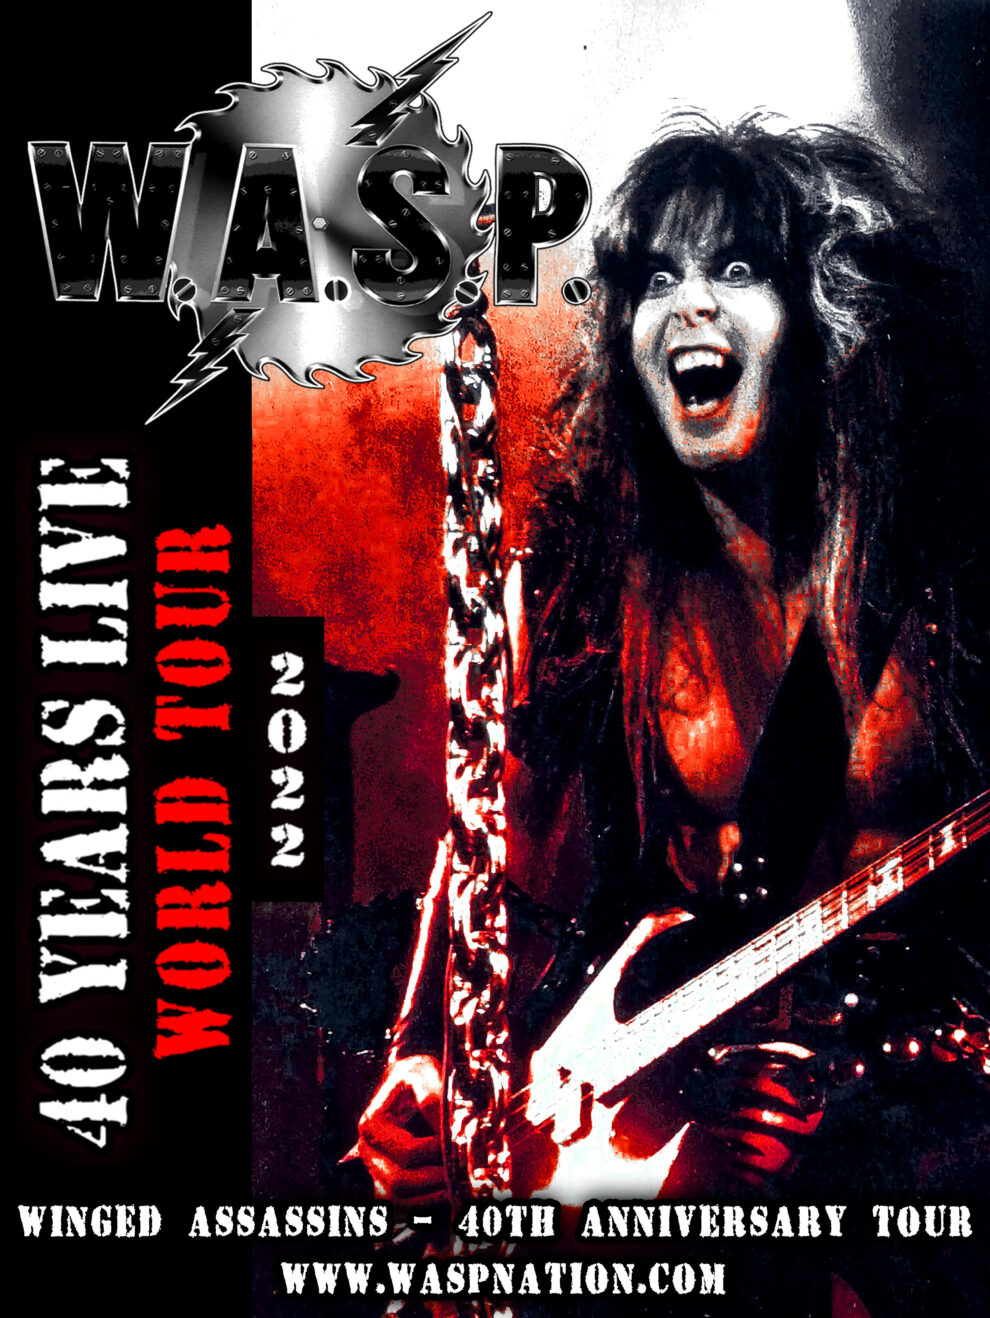 Blackie Lawless Discusses the W.A.S.P. 40th Anniversary World Tour in a New Video